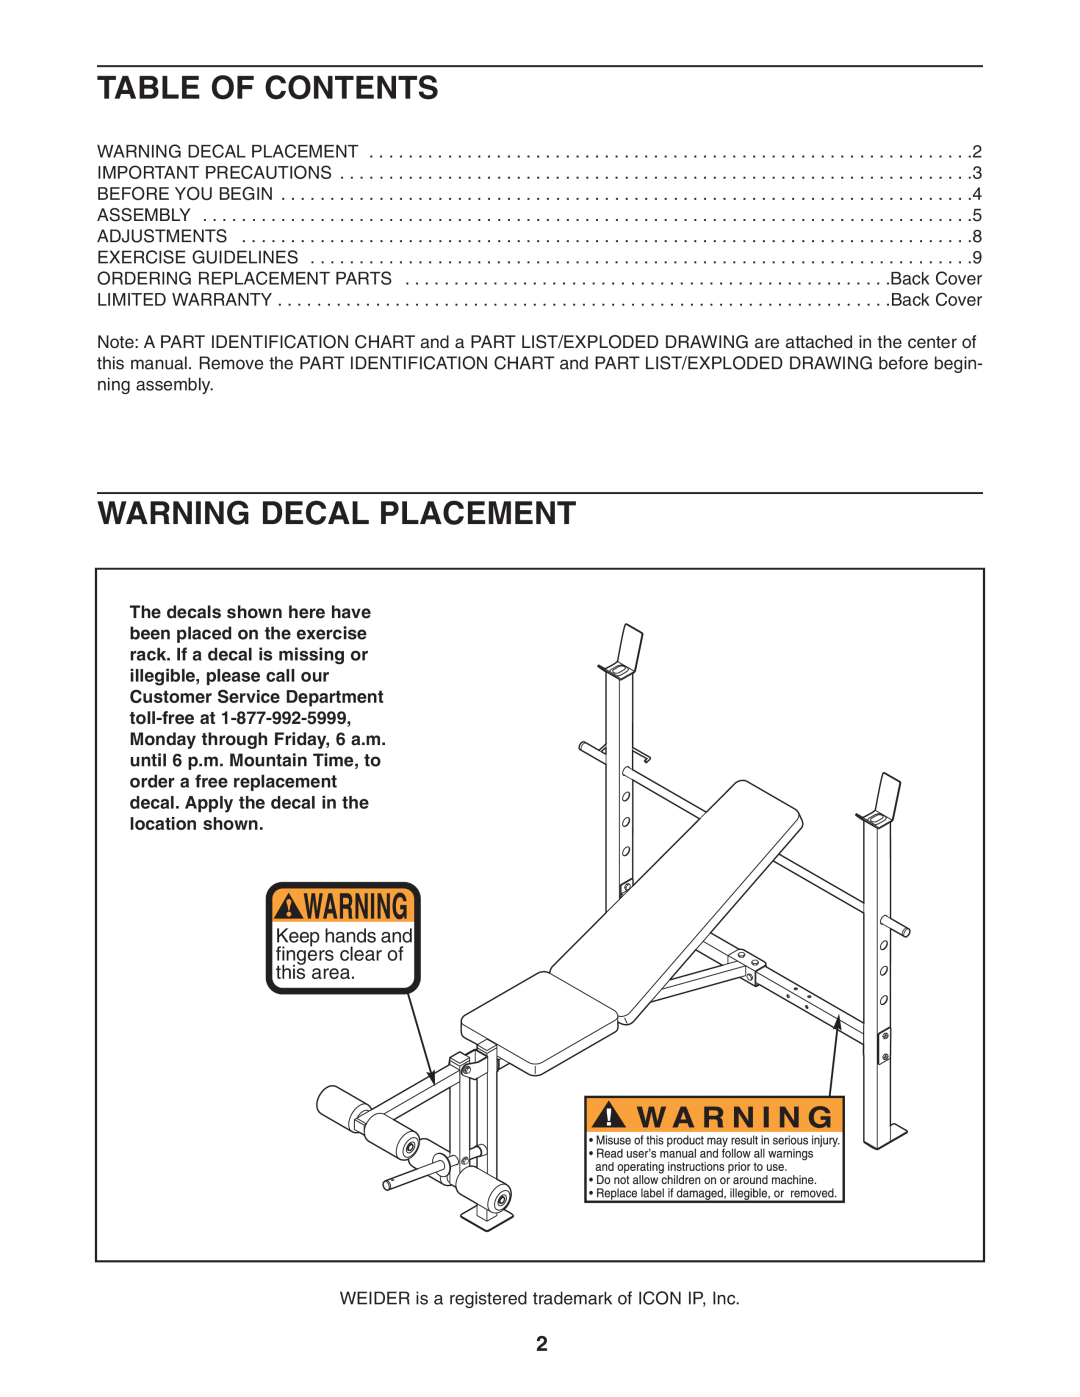 Weider 150722 user manual Table Of Contents, Warning Decal Placement, Keep hands and fingers clear of this area 